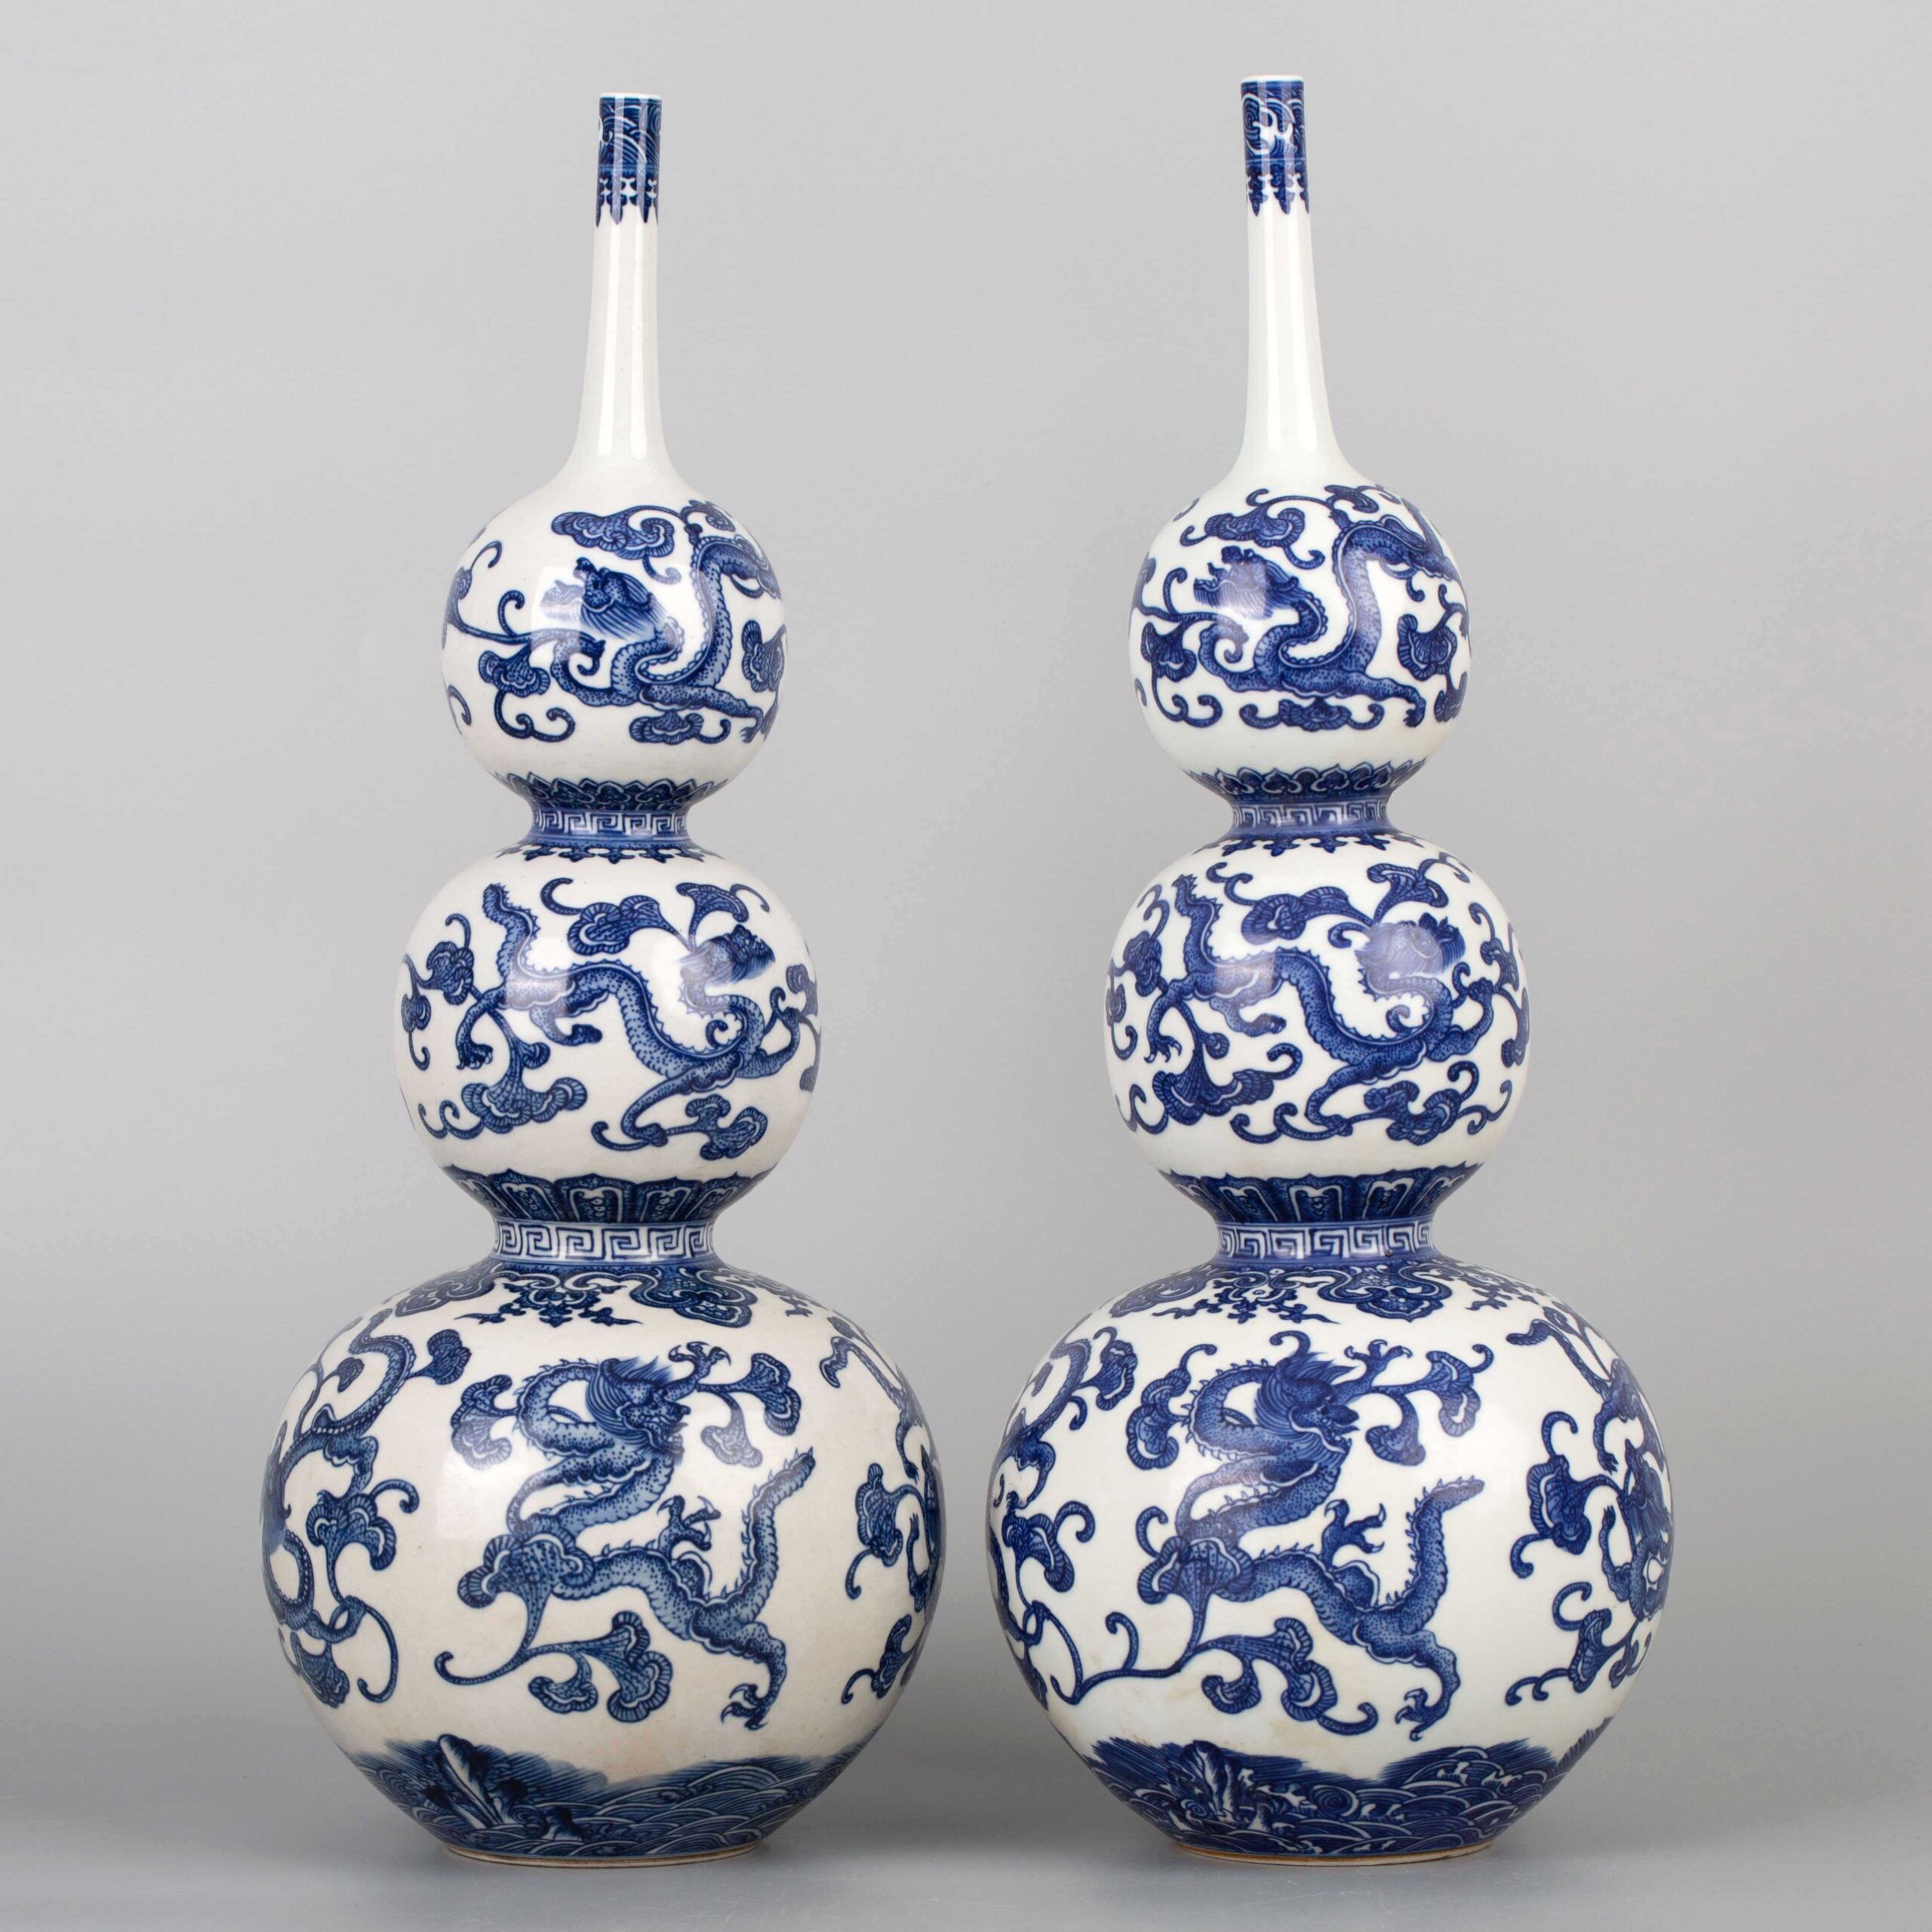 A pair of blue and white gourd vases with Daqing Qianlong Year 